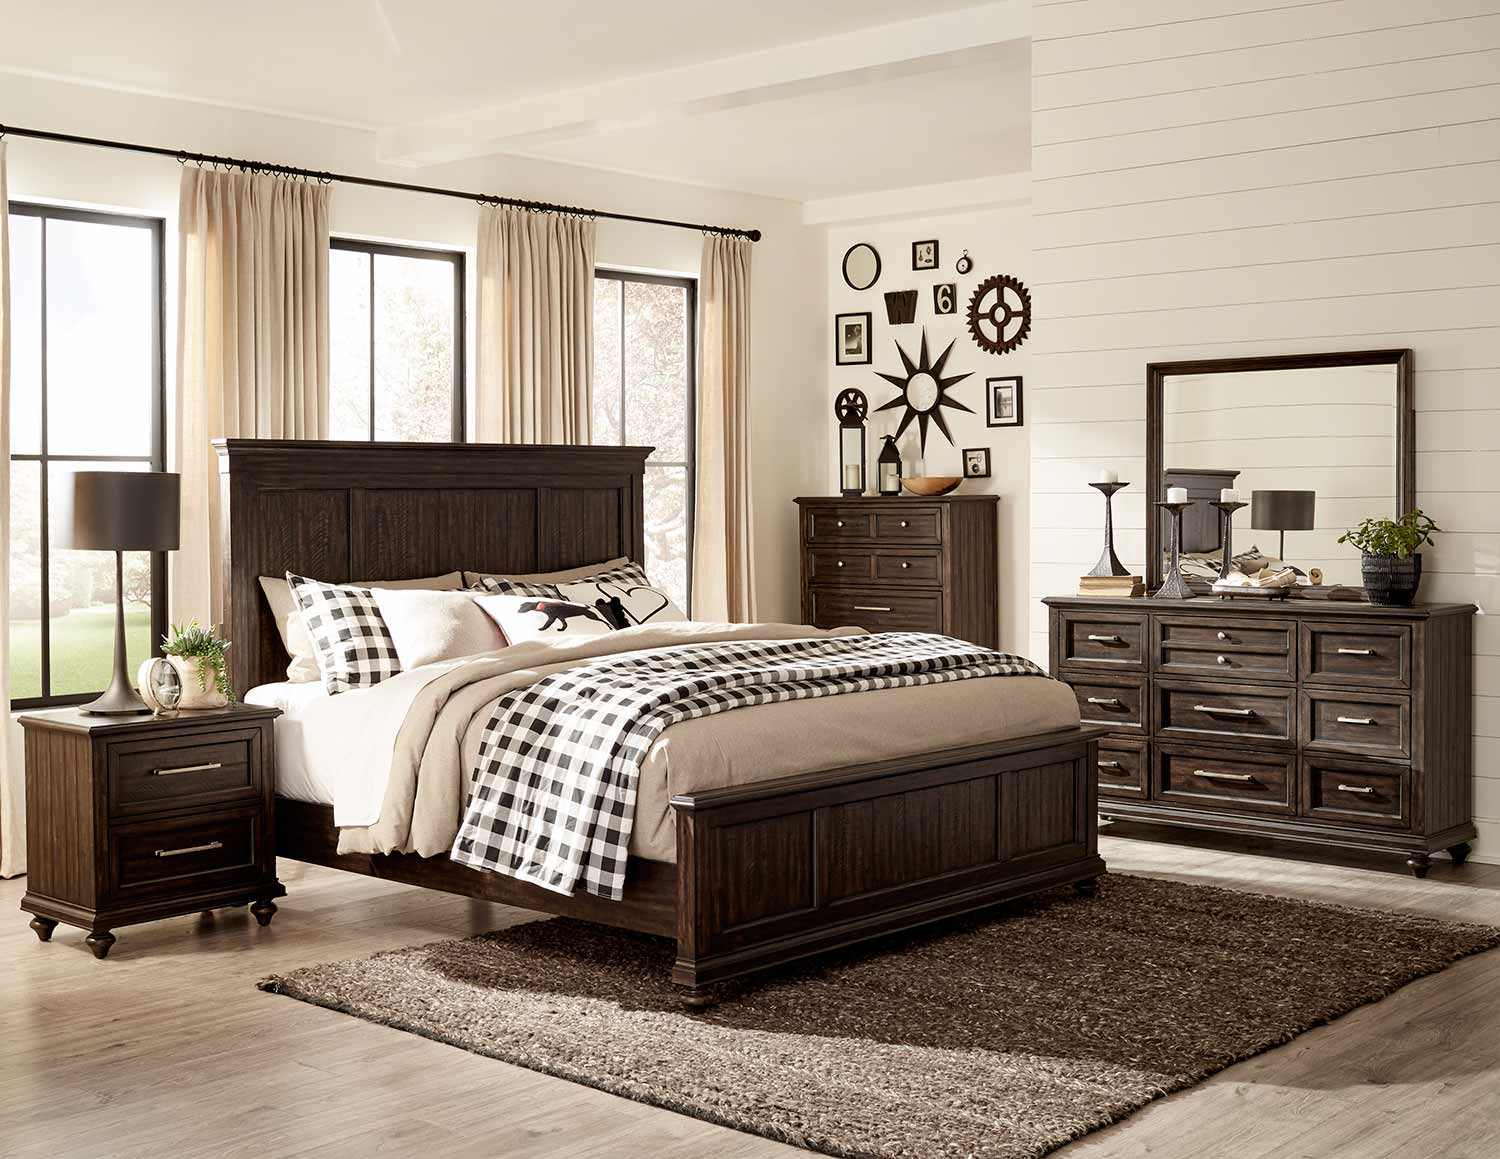 Homelegance Cardano Bedroom Set - Driftwood Charcoal over Acacia Solids and Veneers